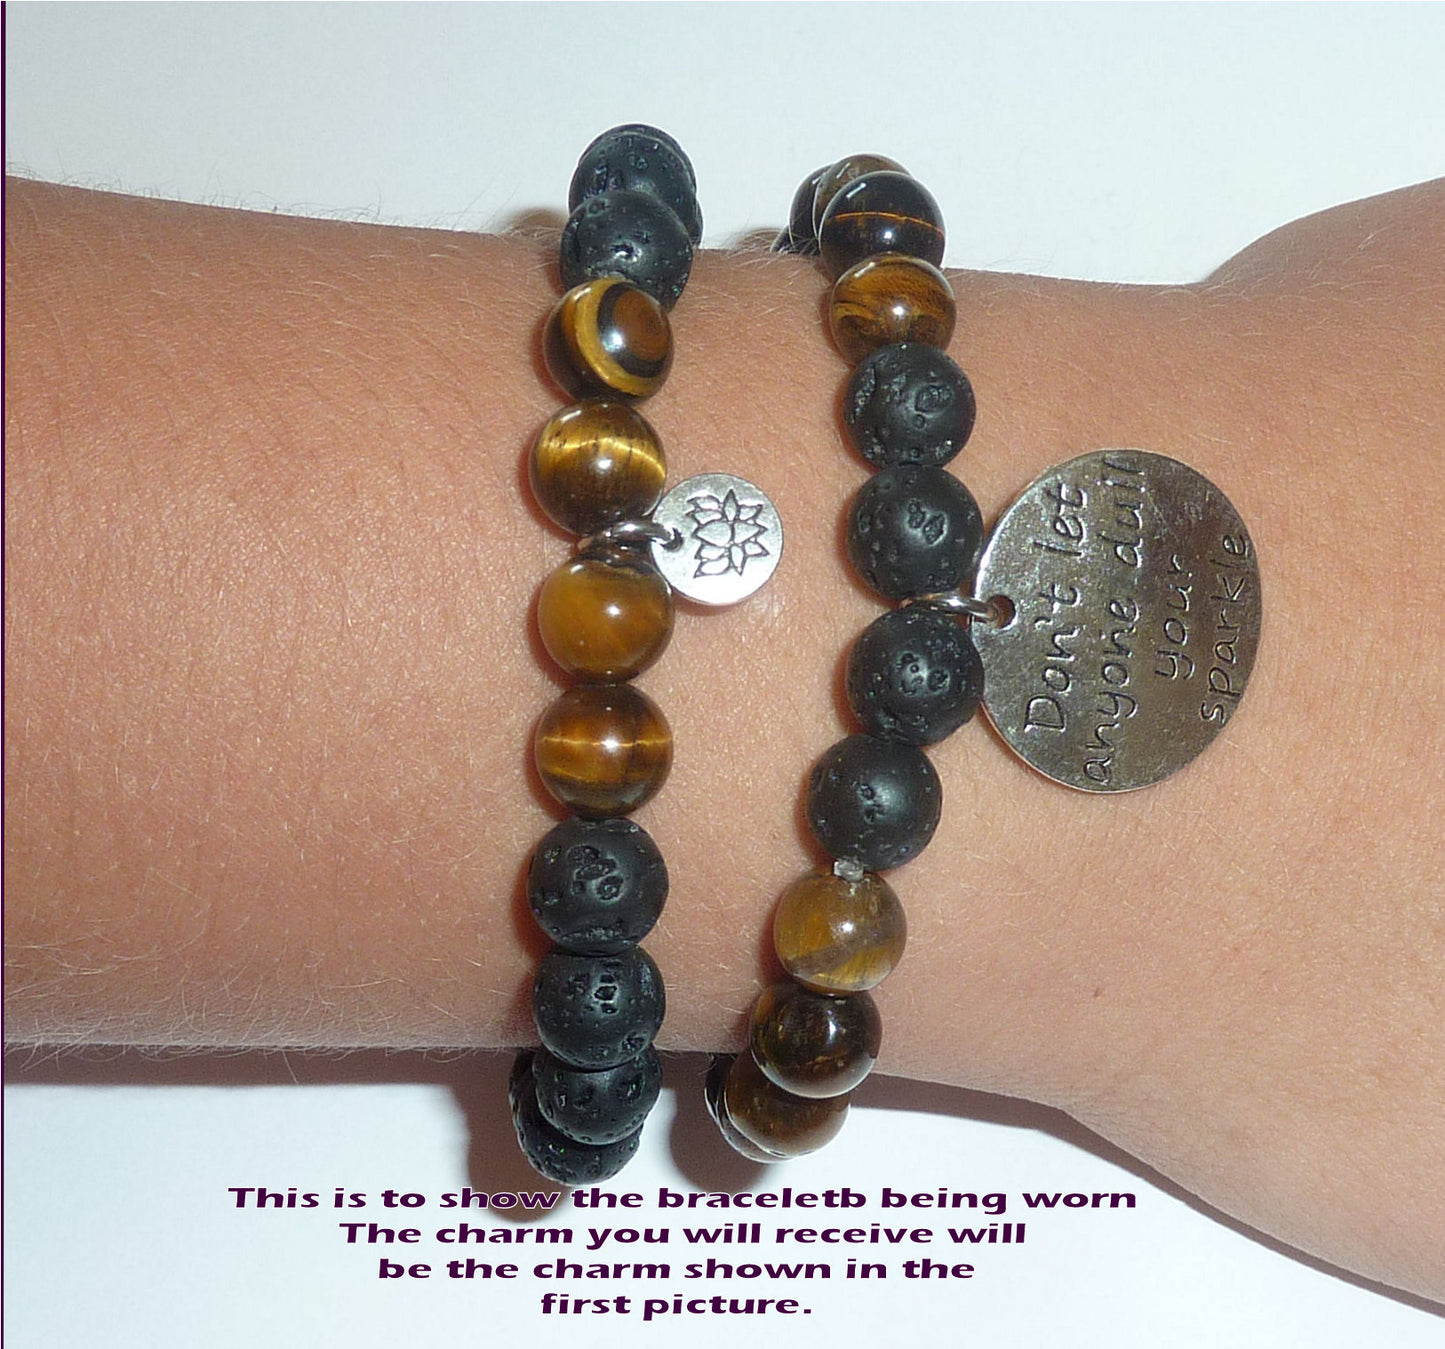 Believe in your self - Women's Tiger Eye & Black Lava Diffuser Yoga Beads Charm Stretch Bracelet Gift Set